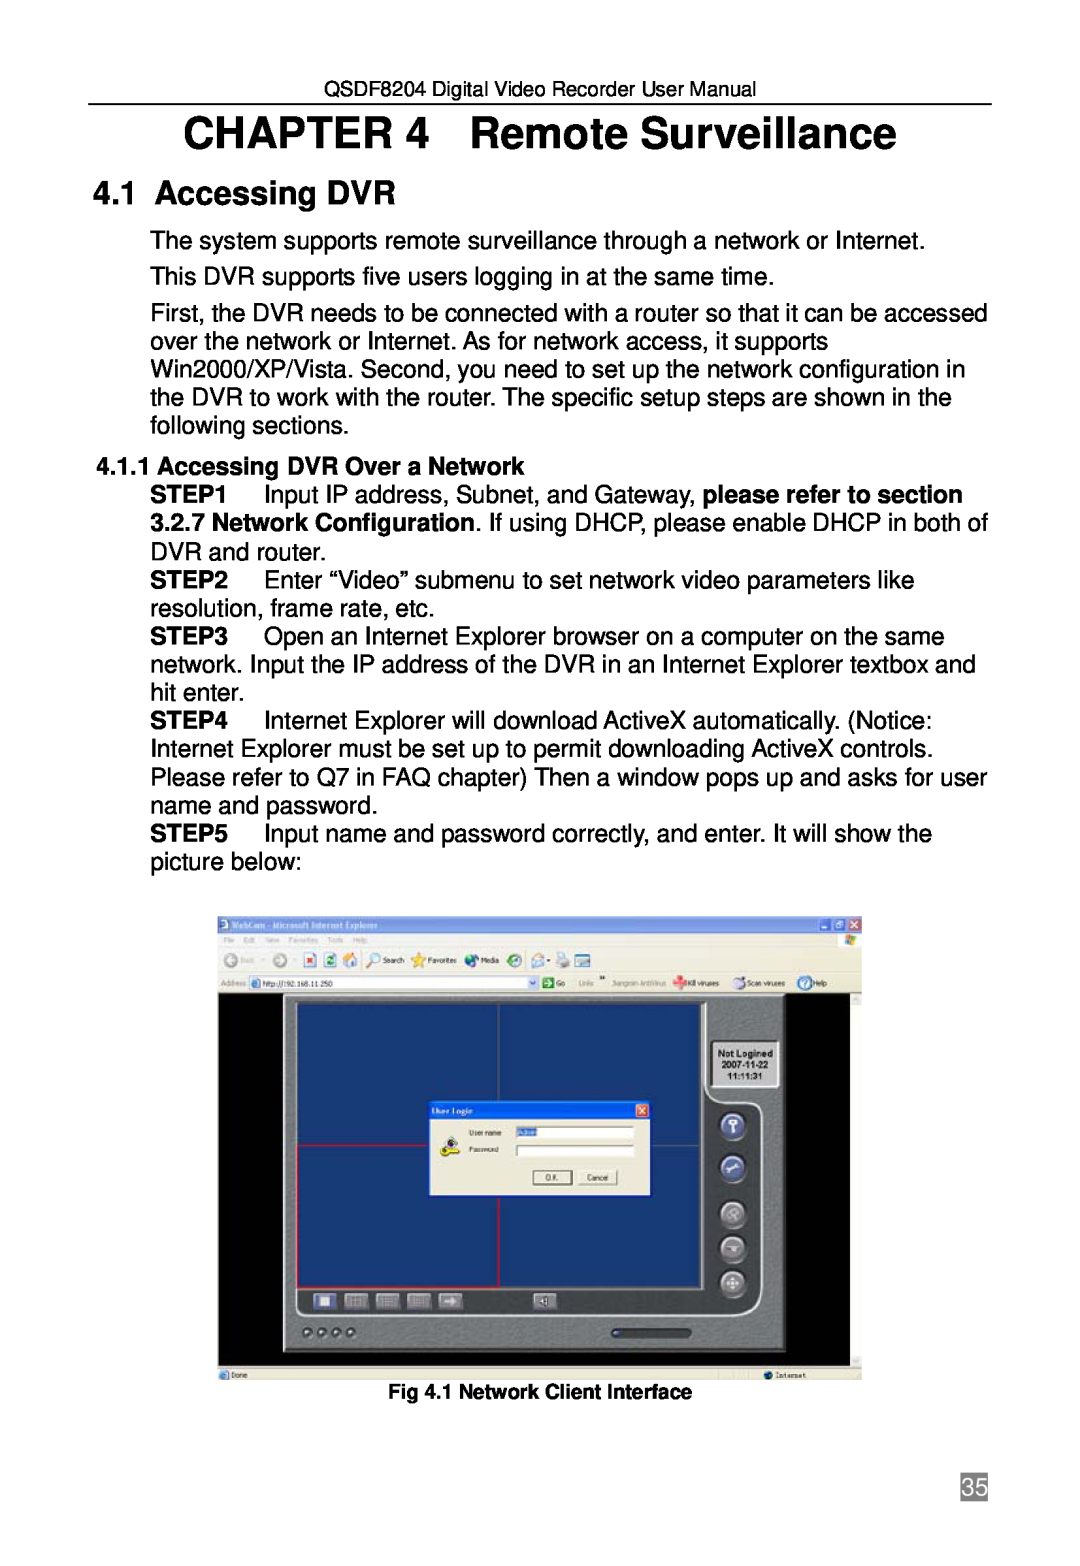 Q-See QSDF8204 user manual Remote Surveillance, Accessing DVR Over a Network 